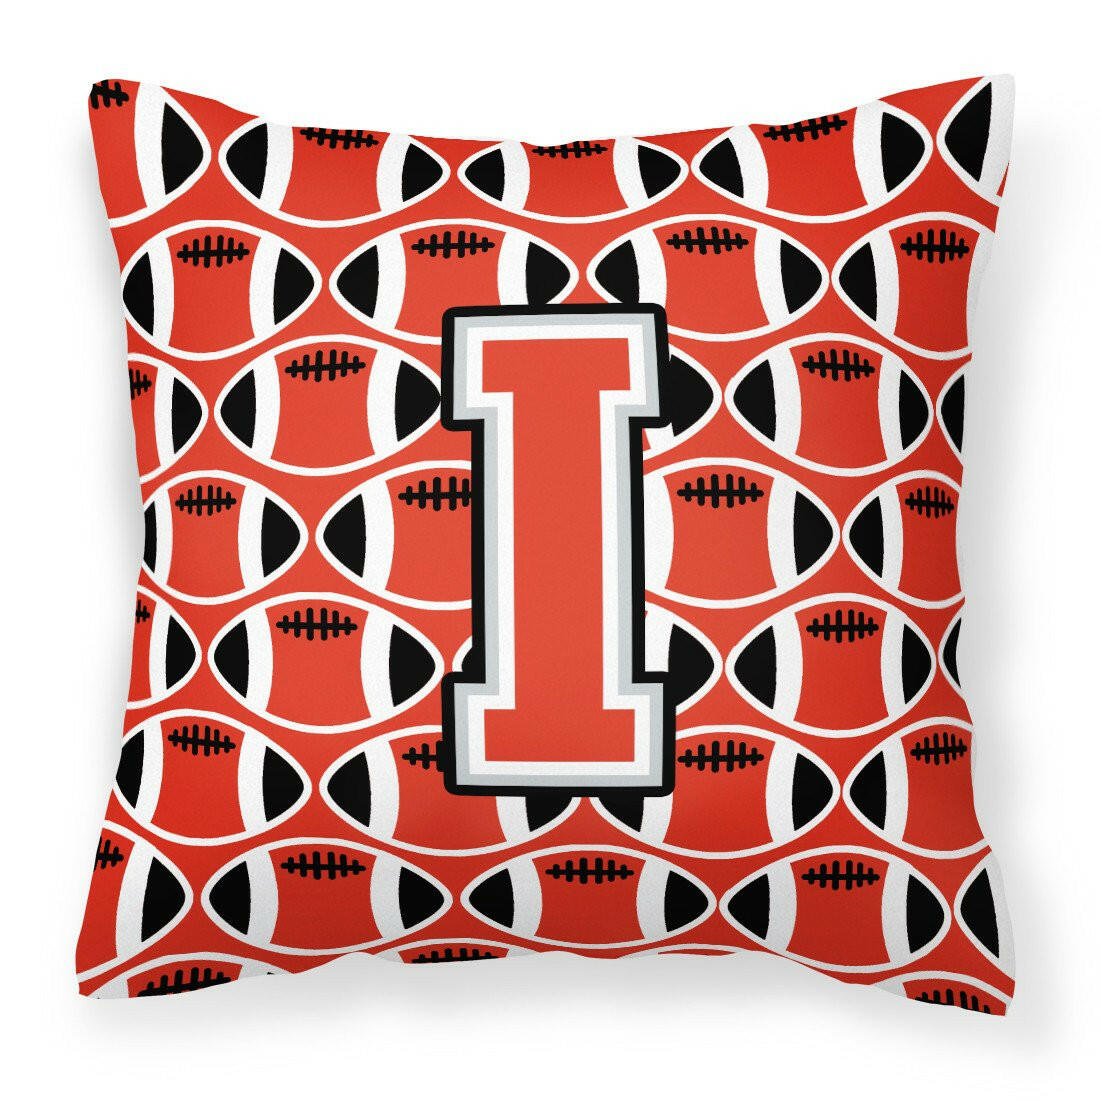 Letter I Football Scarlet and Grey Fabric Decorative Pillow CJ1067-IPW1414 by Caroline's Treasures